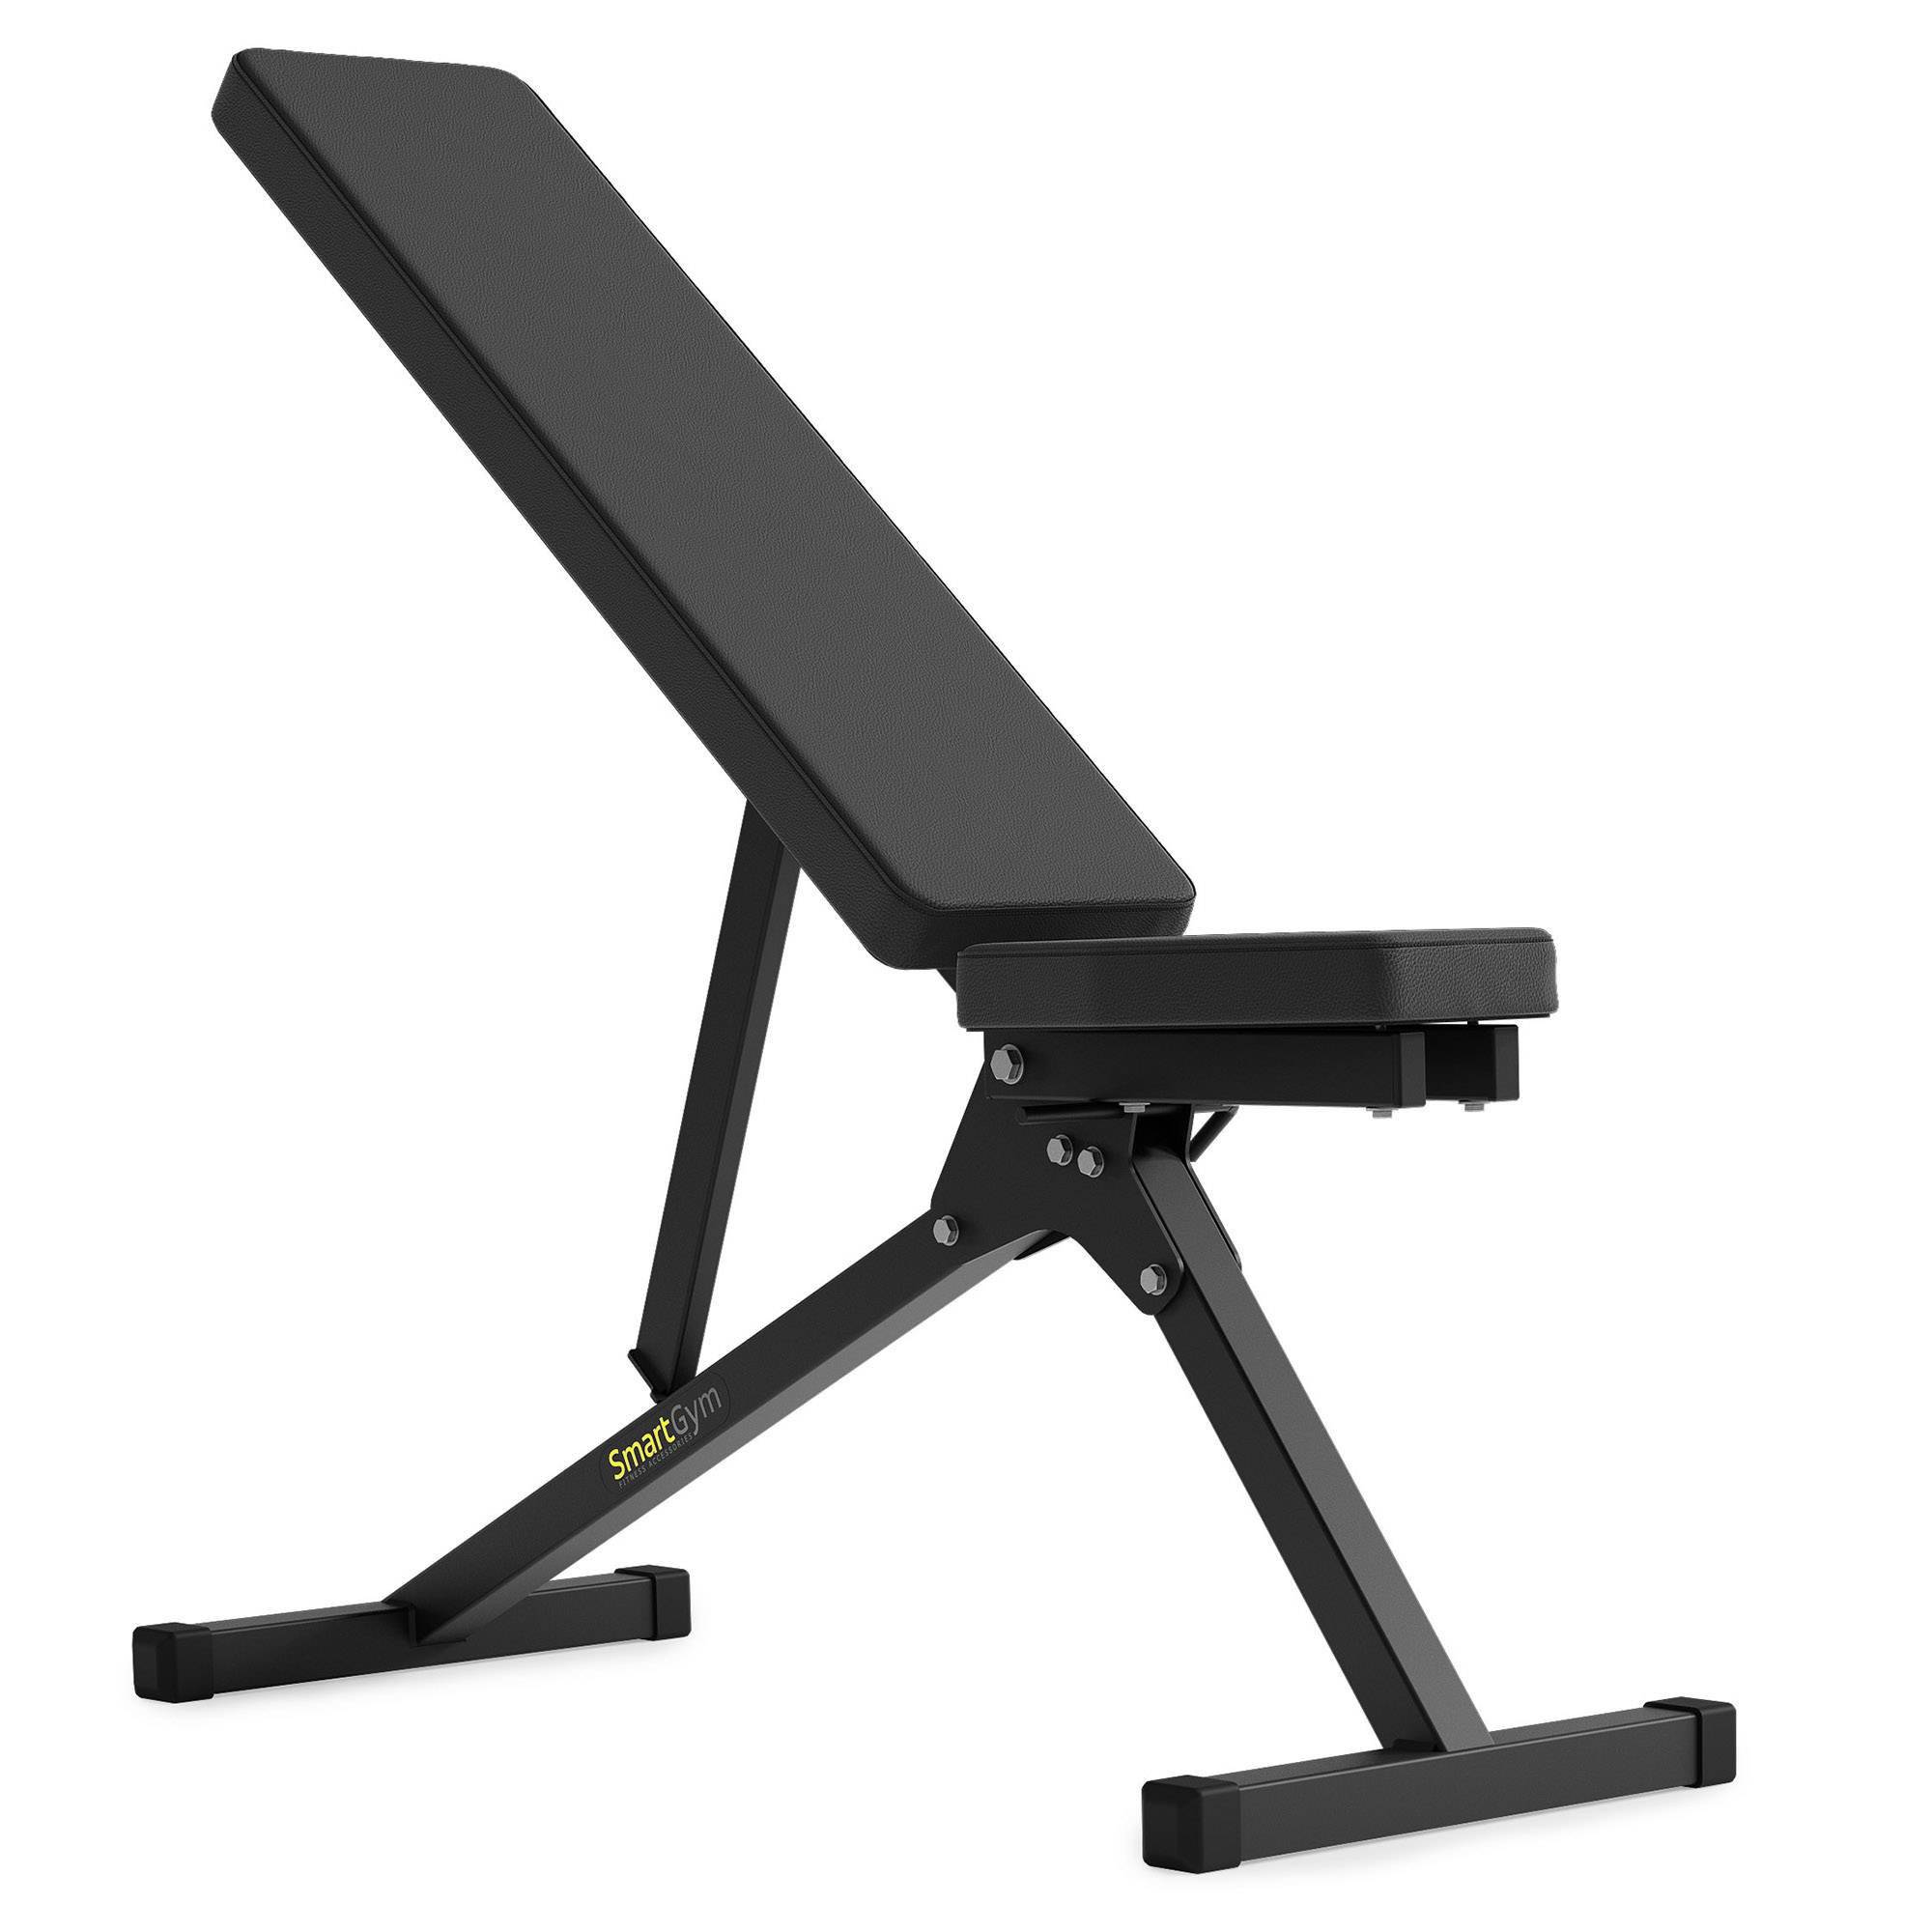 Adjustable bench SG-11 - Strength | \\ equipment benches \\ SmartGym Benches Training Fitness Accessories